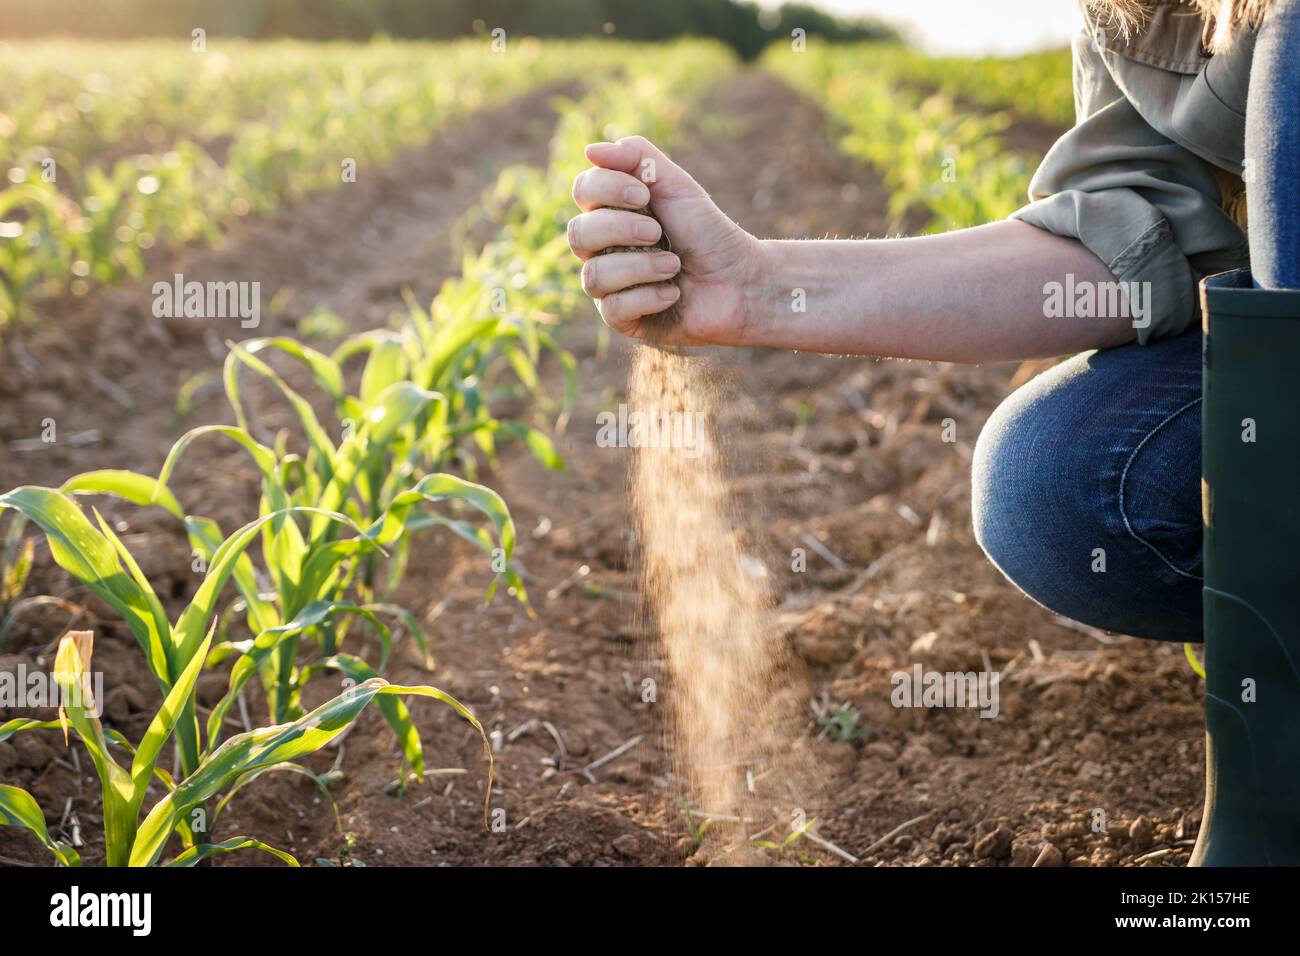 Drought in field. Farm worker holding dry soil in hand and control quality of fertility at arid climate. Impact of climate change on agriculture Stock Photo